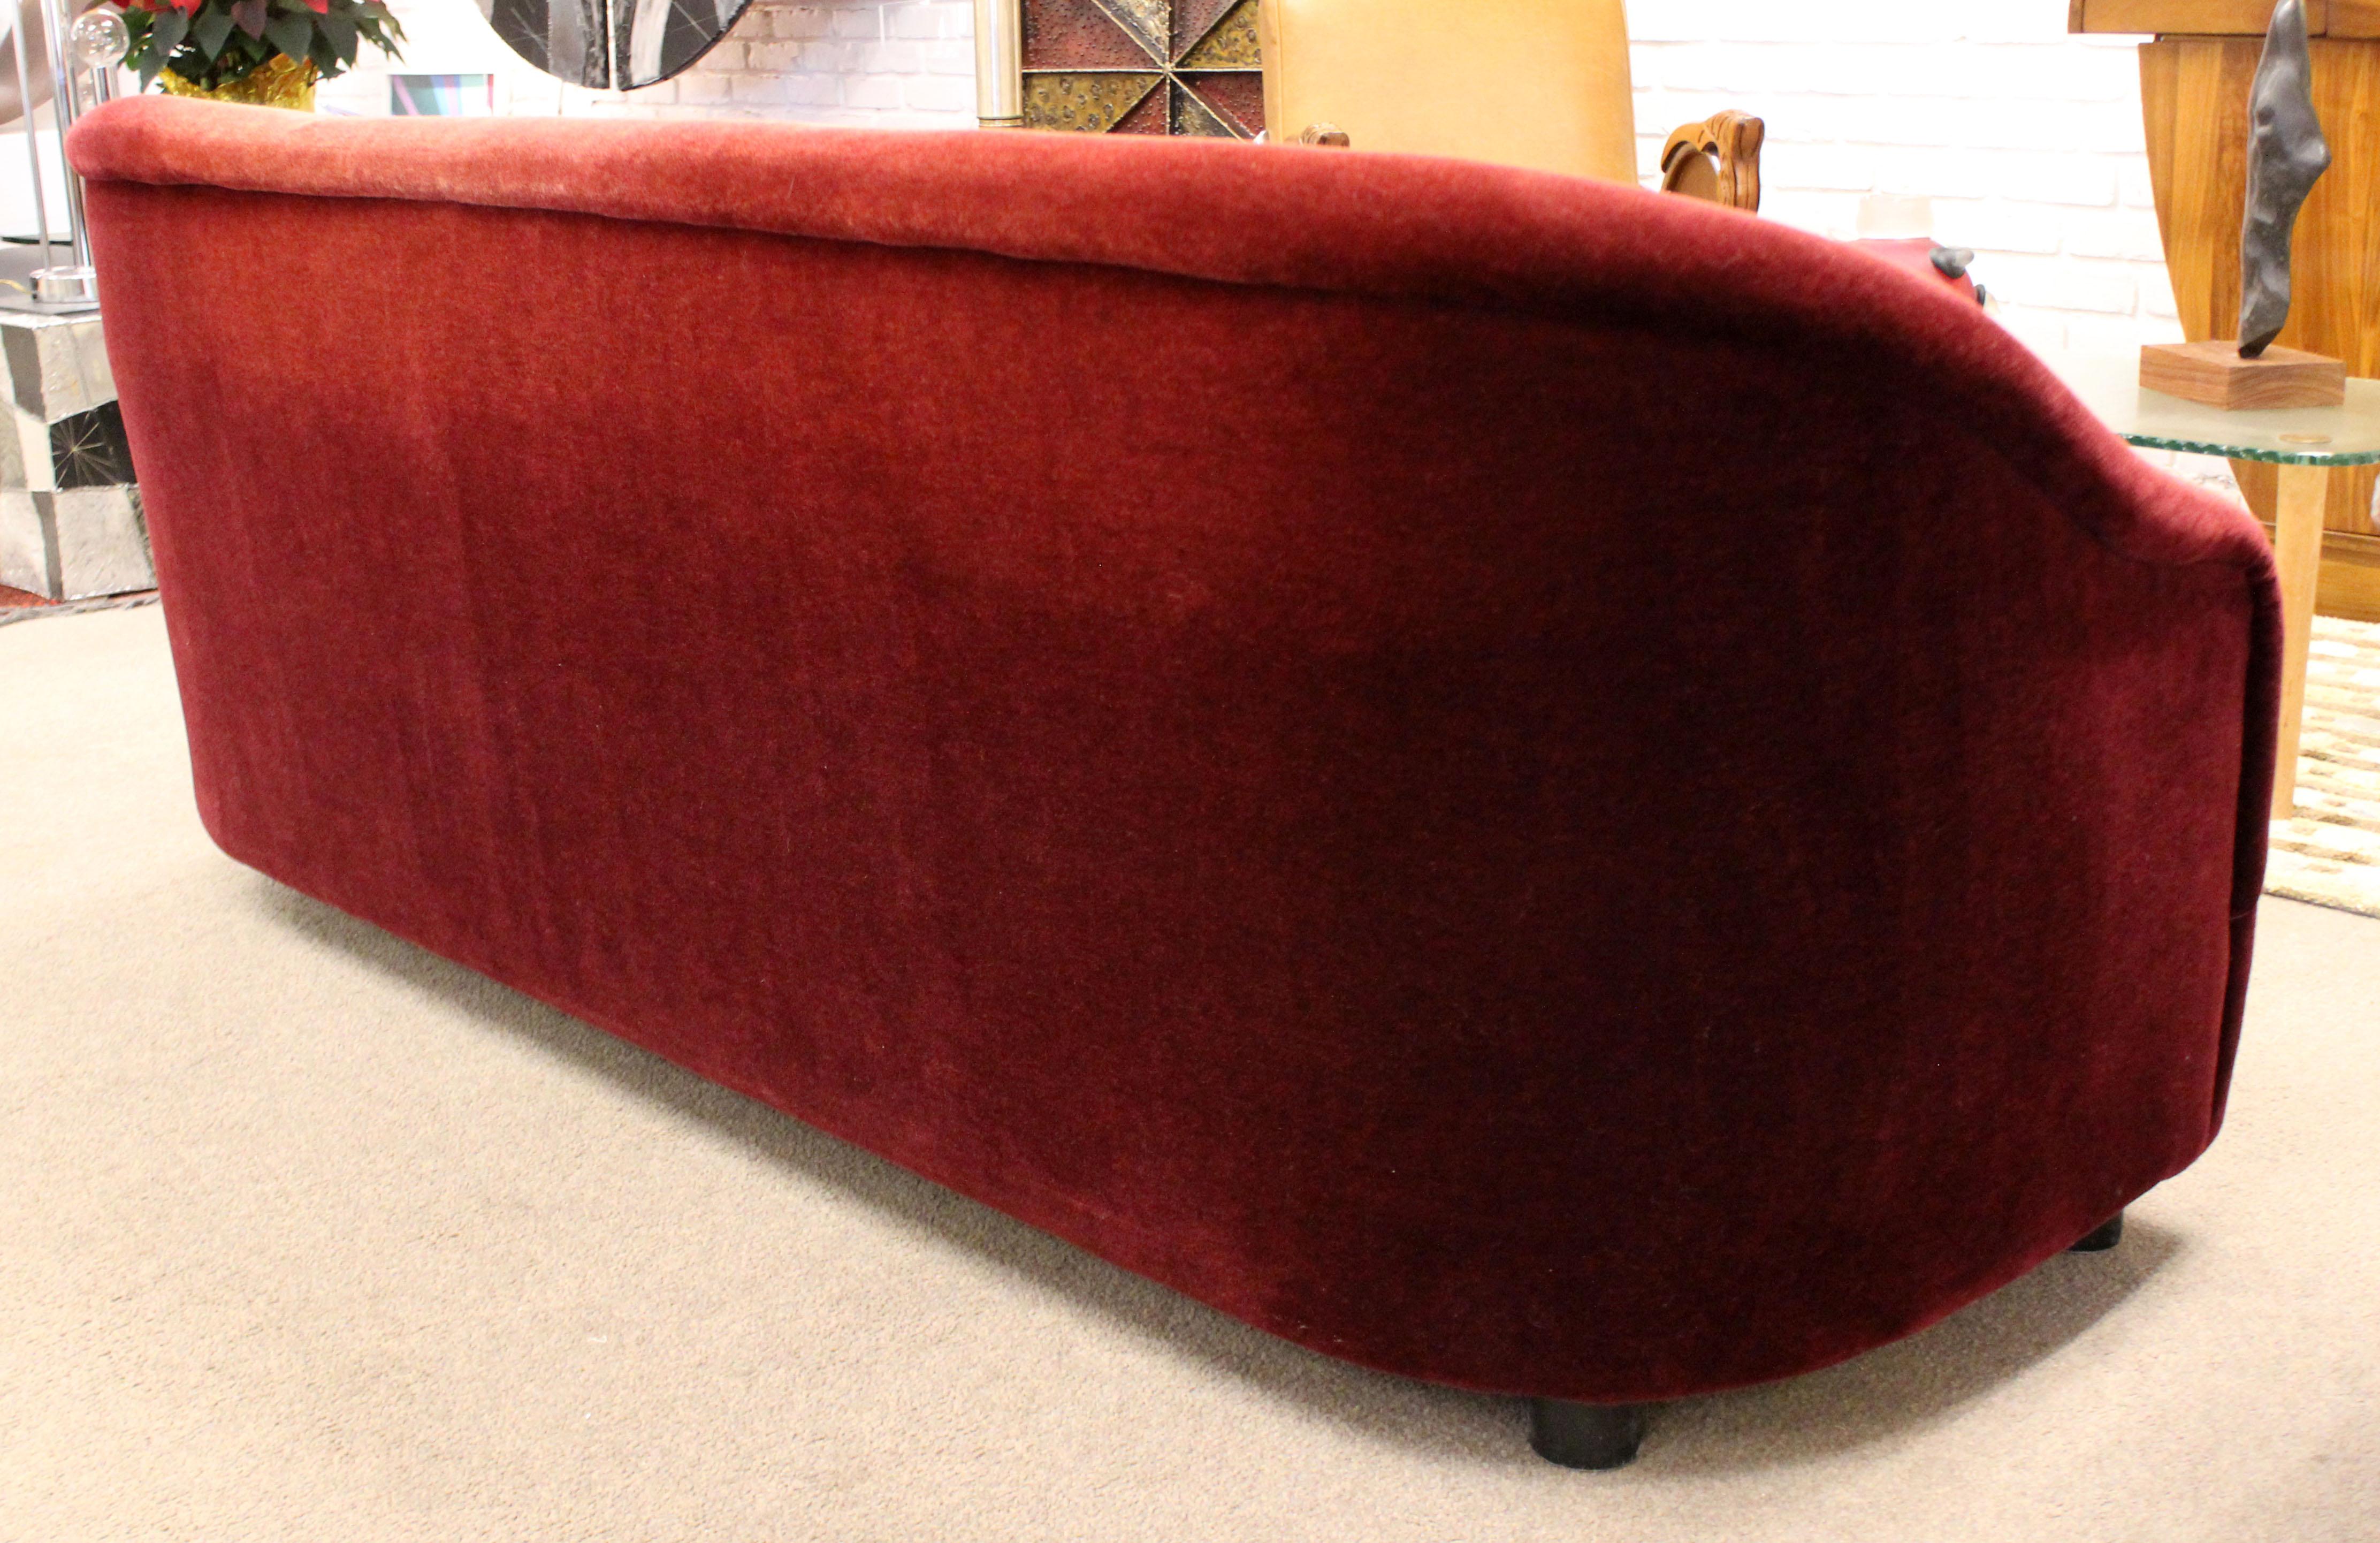 Late 20th Century Contemporary Art Deco Style Red Mohair Curved Sofa Loveseat Settee David Edward